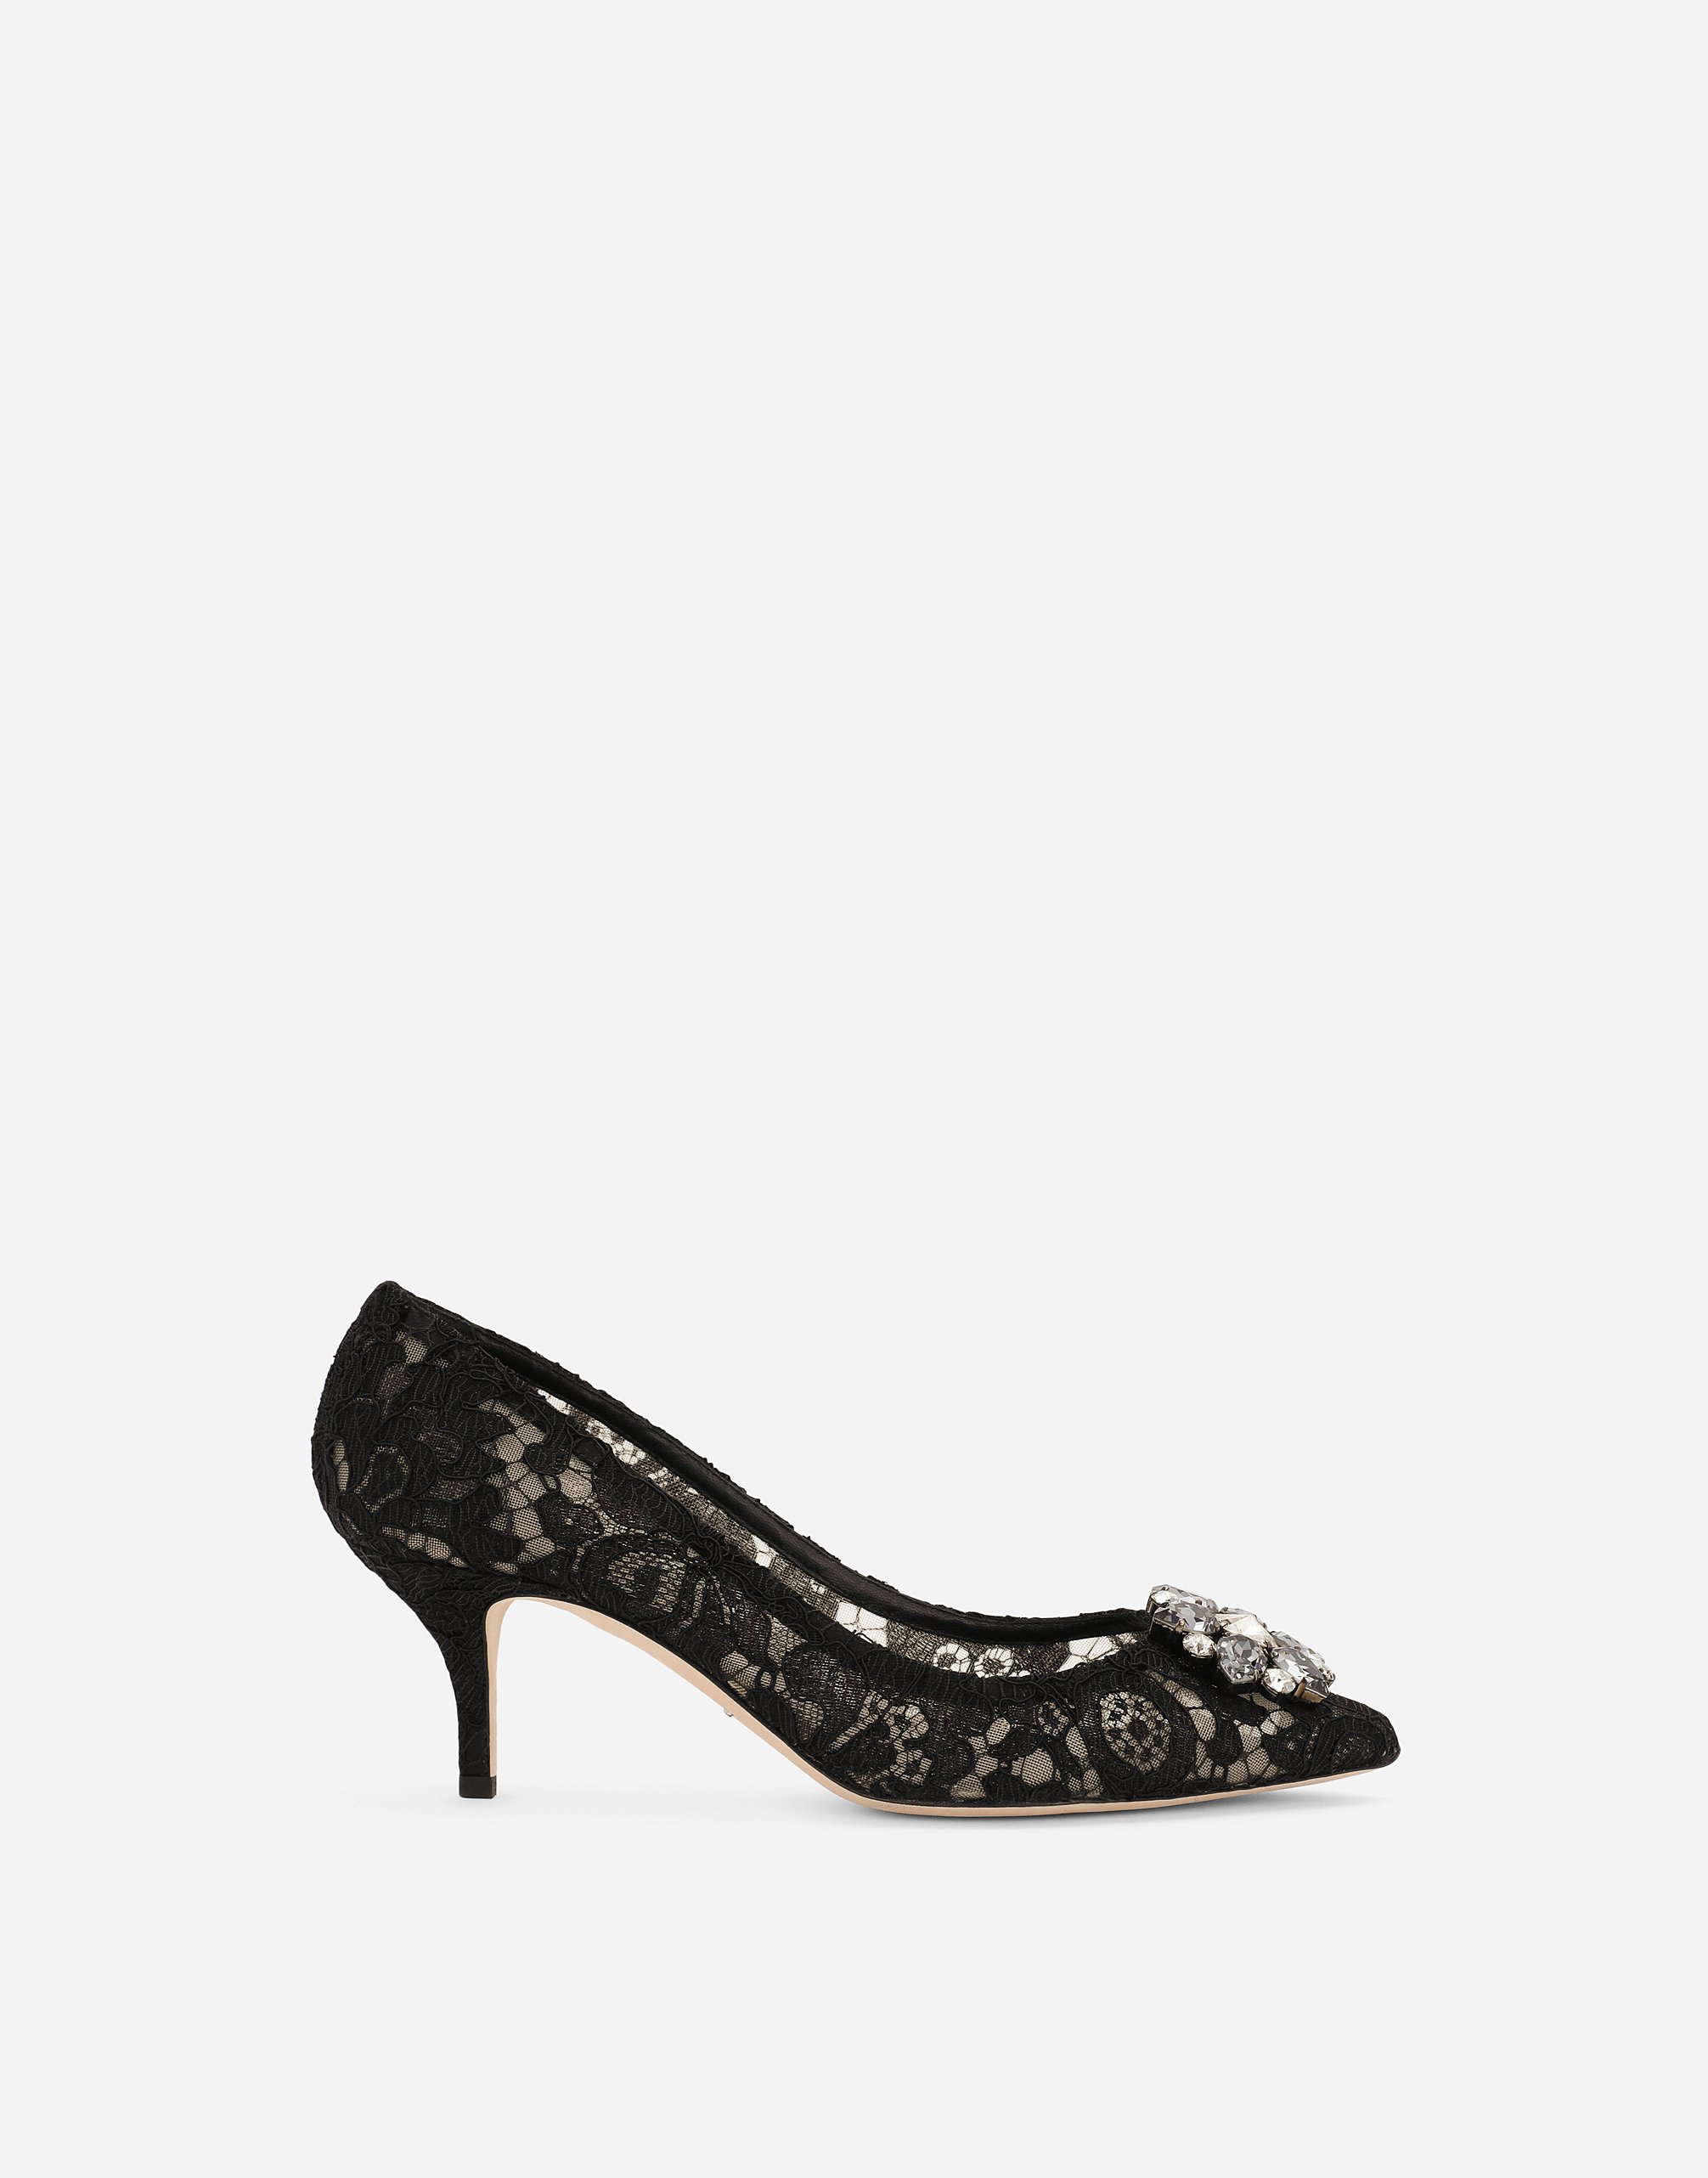 Lace rainbow pumps with brooch detailing in Black for Women | Dolce&Gabbana®